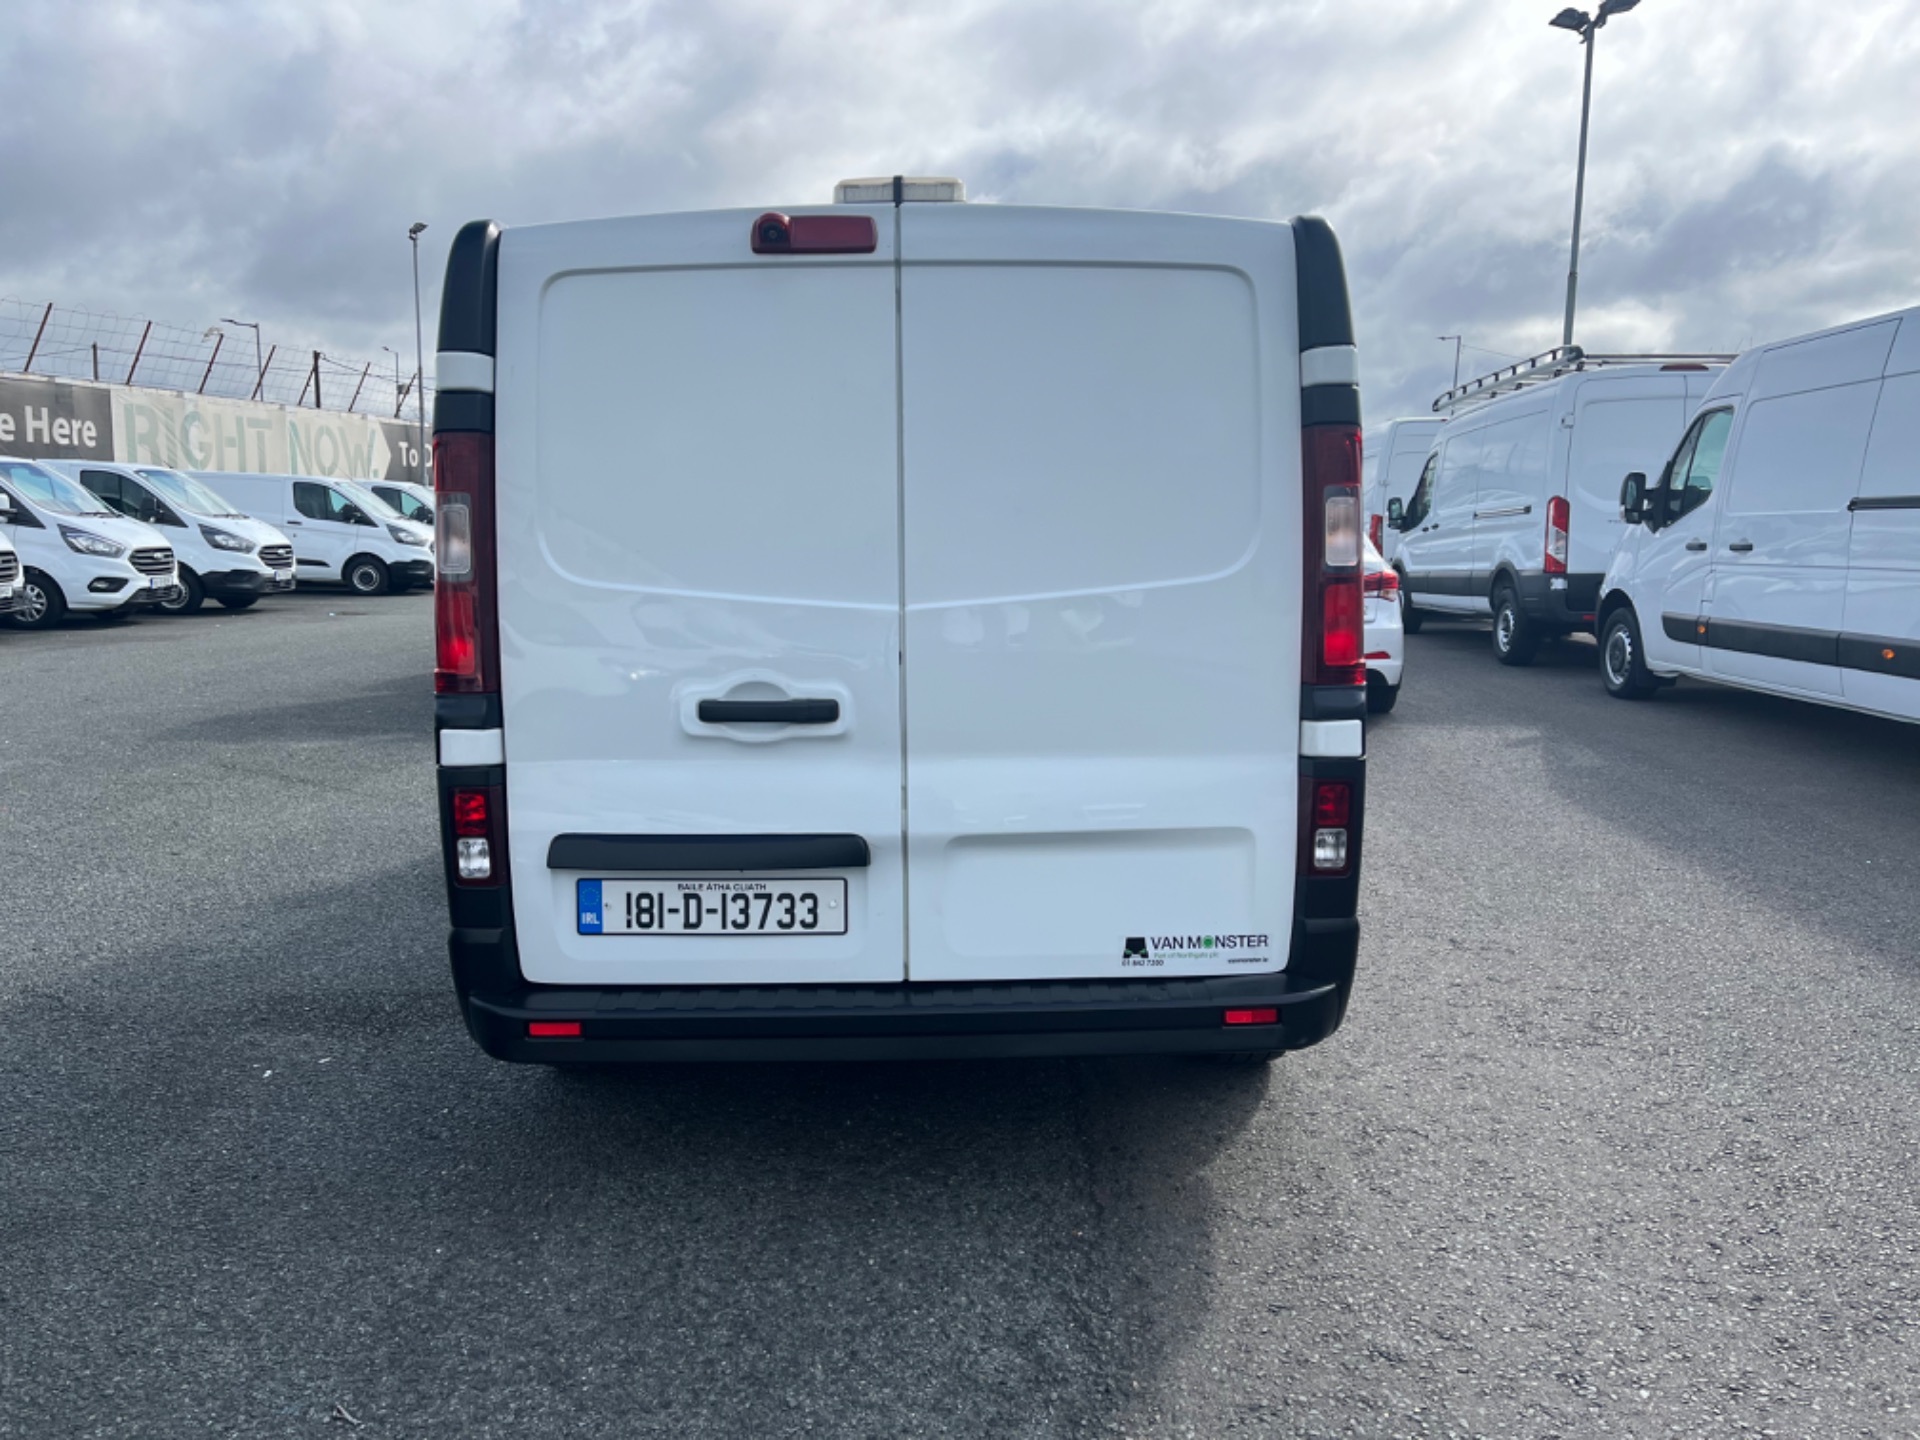 2018 Renault Trafic LL29 DCI 120 Business 3DR (181D13733) Thumbnail 6